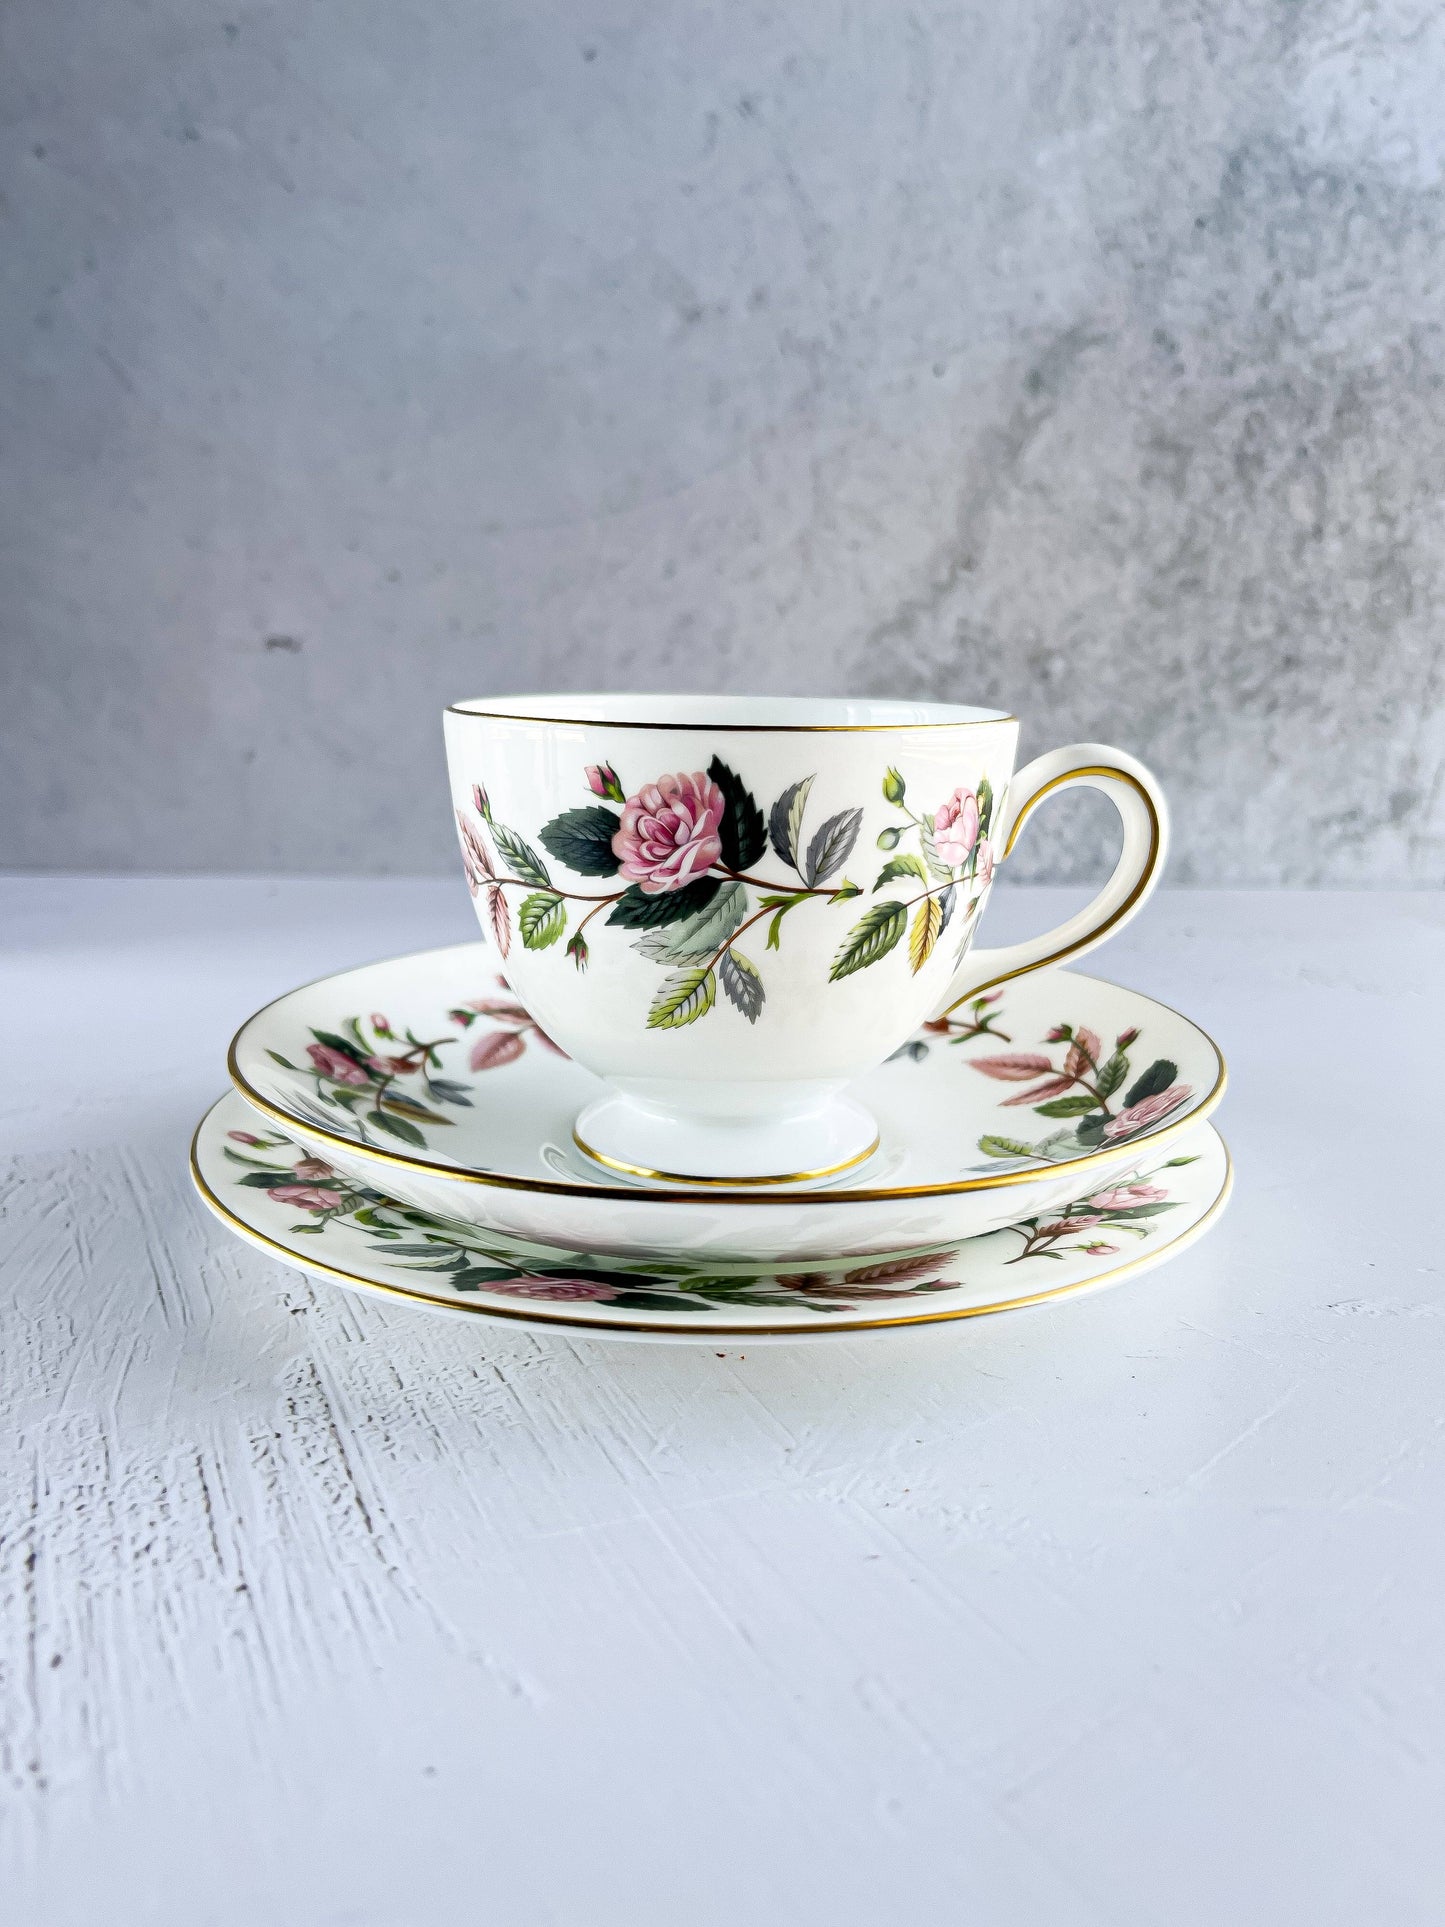 Wedgwood 22-Piece Tea Service - 'Hathaway Rose' Collection - SOSC Home